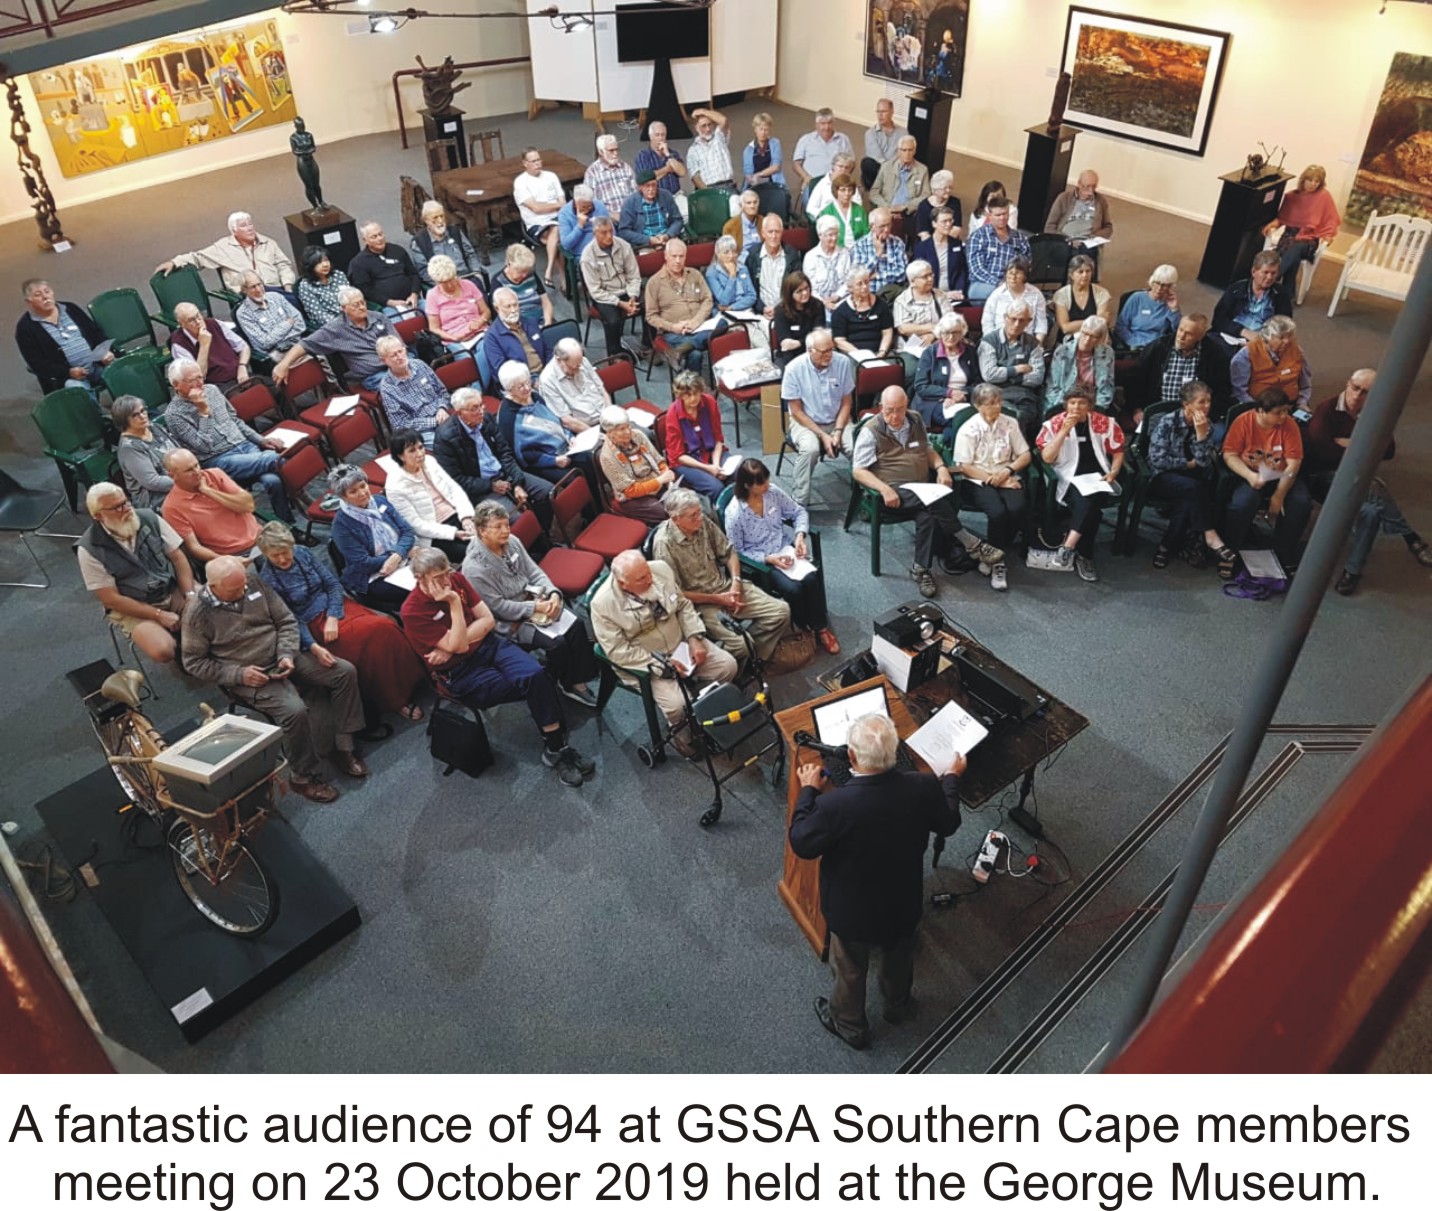 Fantastic audience of 94 at GSSA Southern Cape members meeting on 23 October at the George Museumjpeg